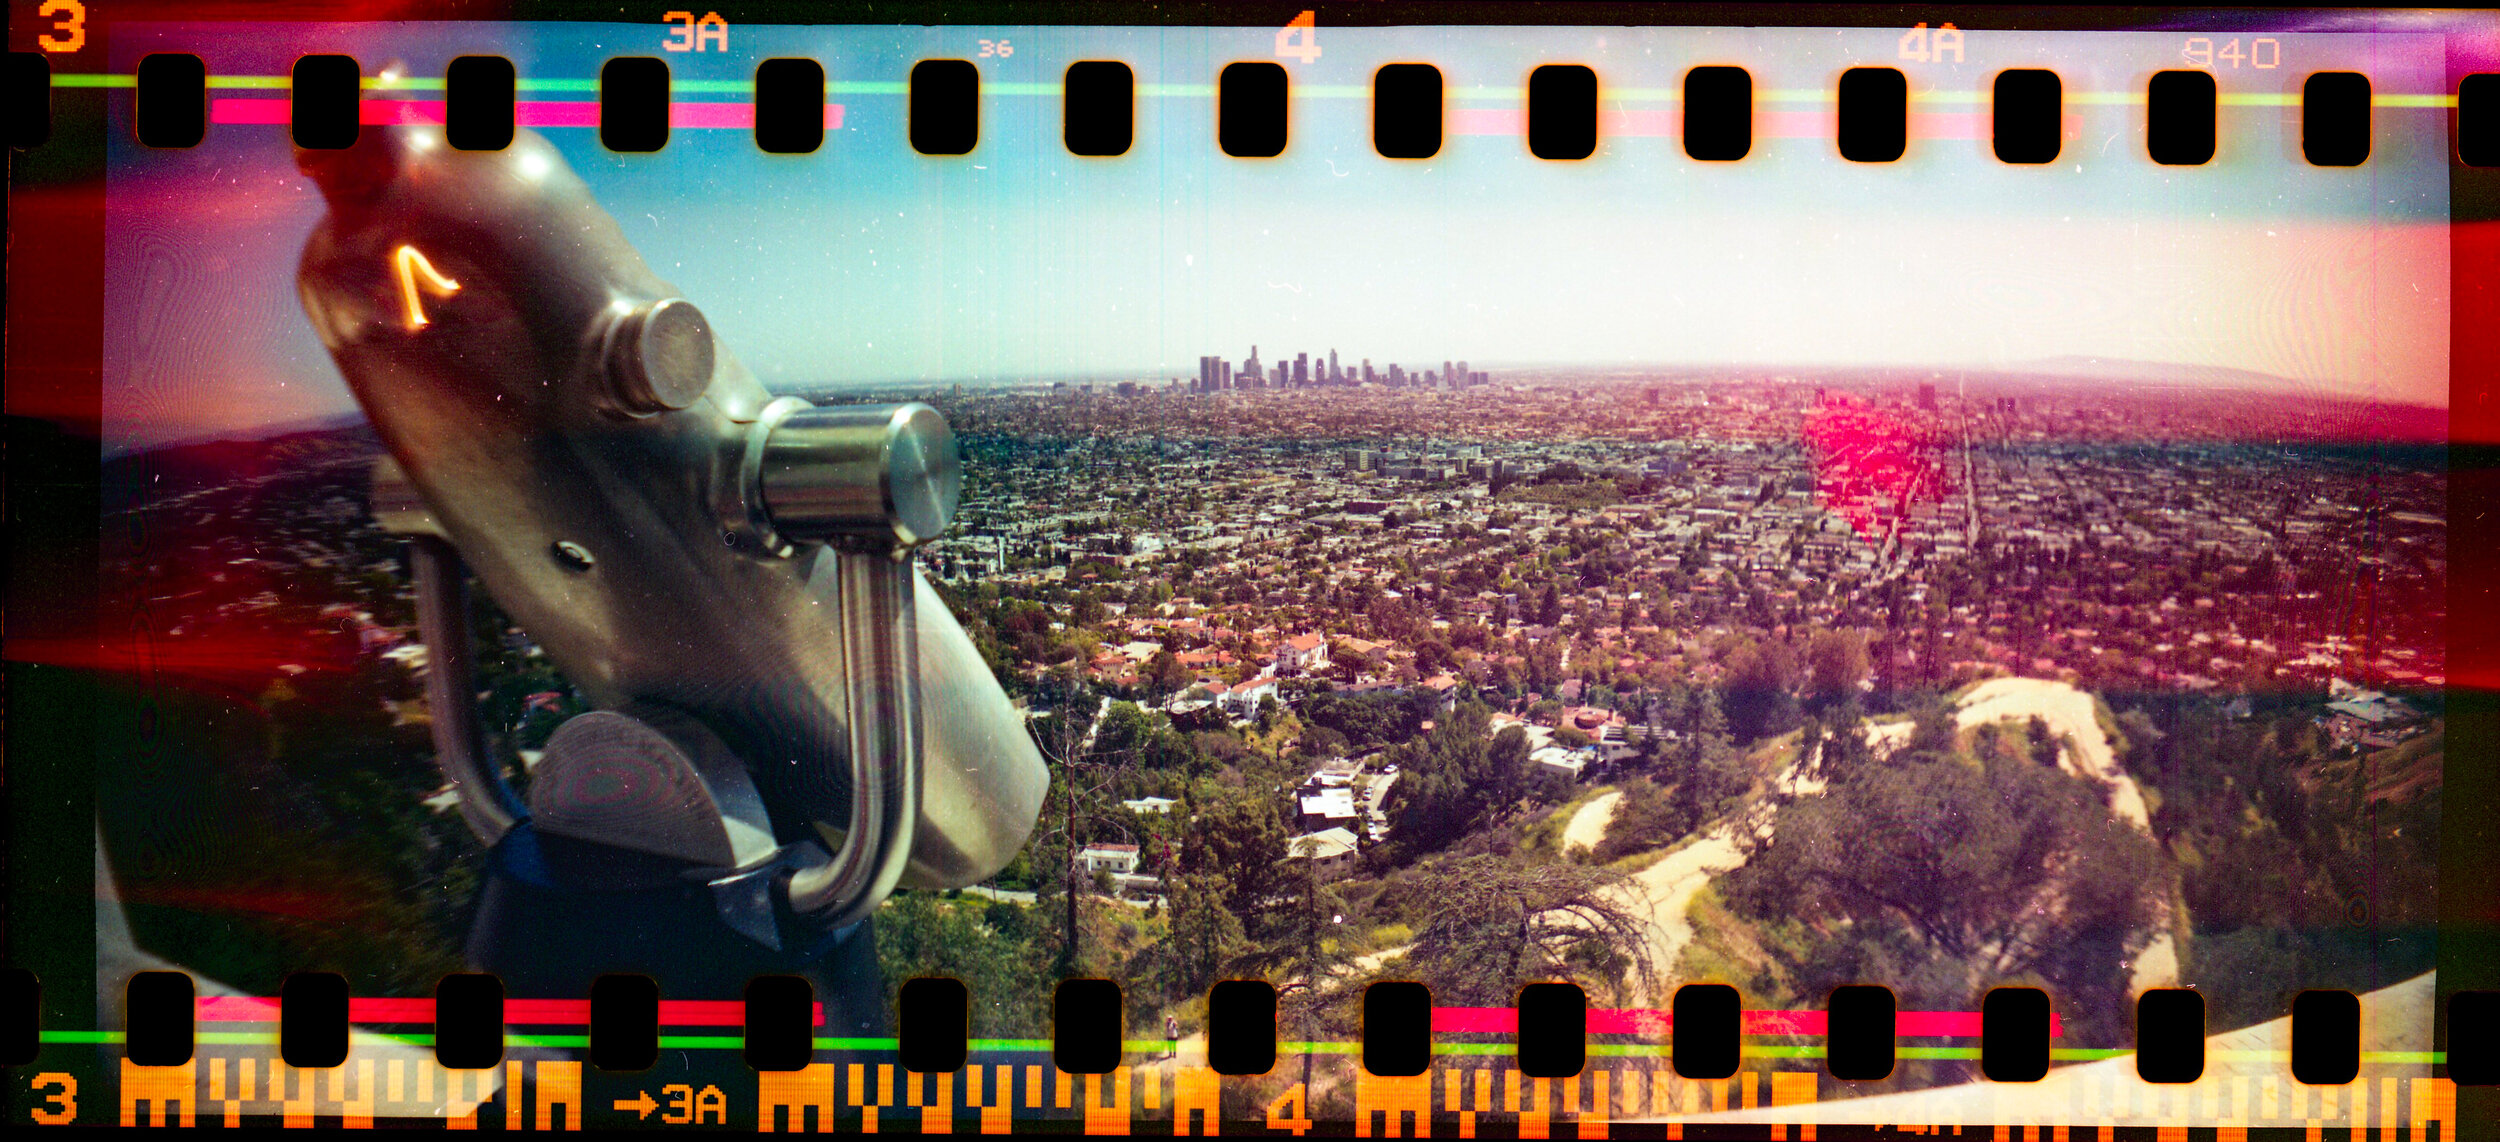 Griffith Observatory, Los Angeles, California. 